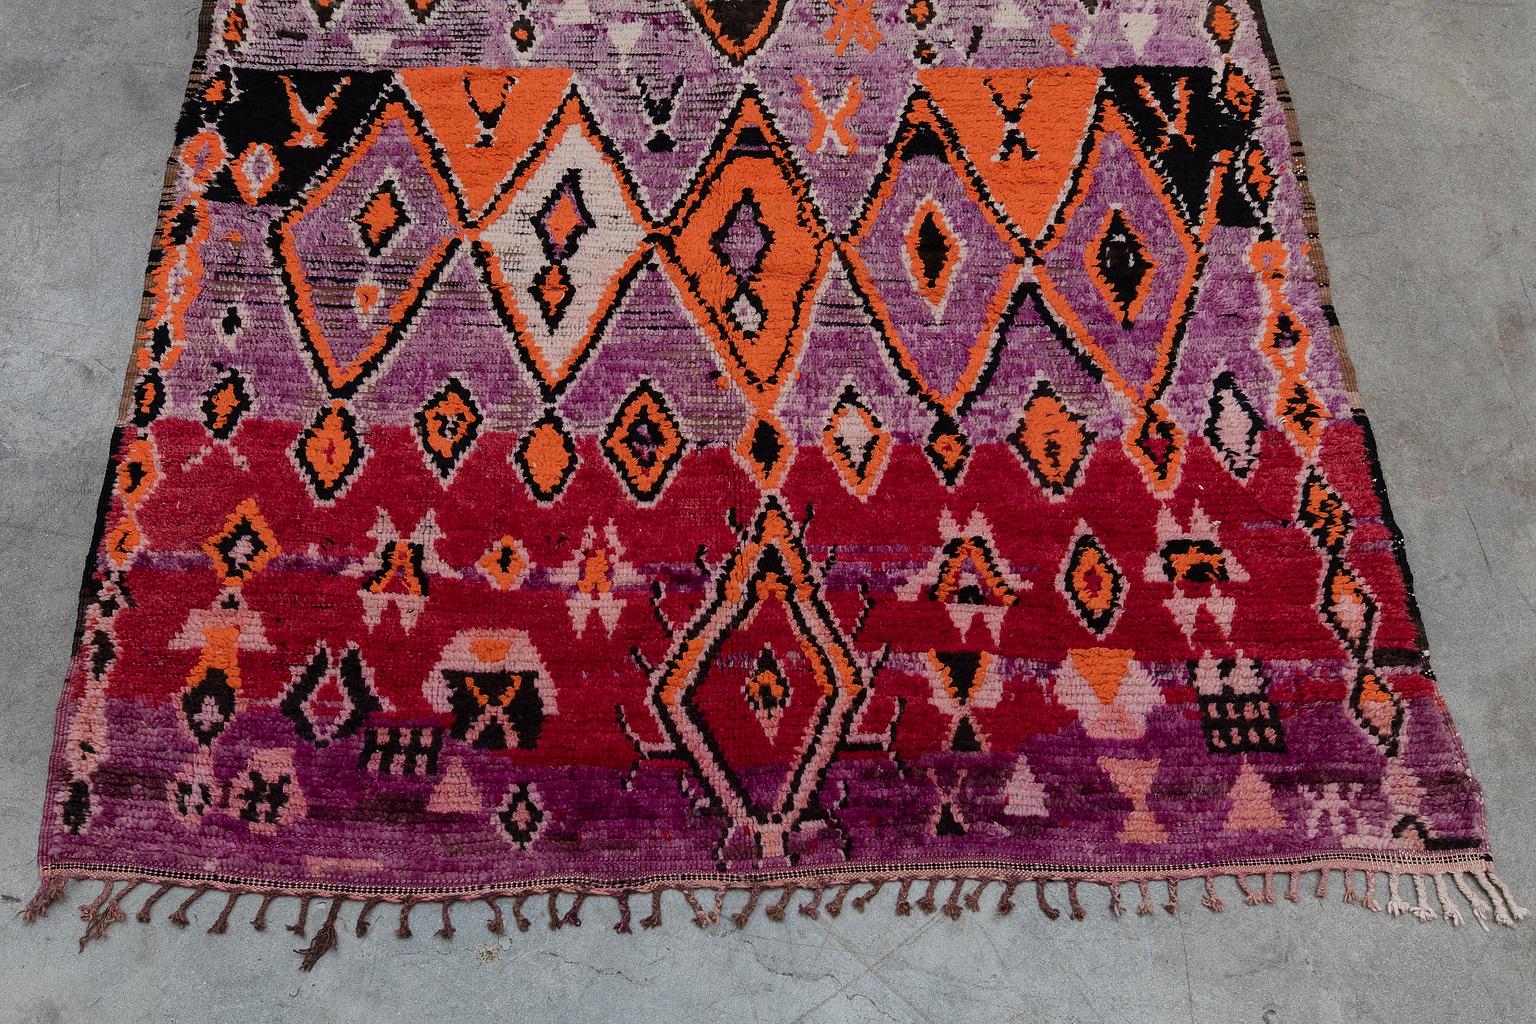 Boujad is a large widespread area and not a tribe. Since they are woven by a number of tribes so they can display varying techniques and styles. Originating in the middle atlas region of Morocco, Boujad rugs are low-pile soft wool and known for